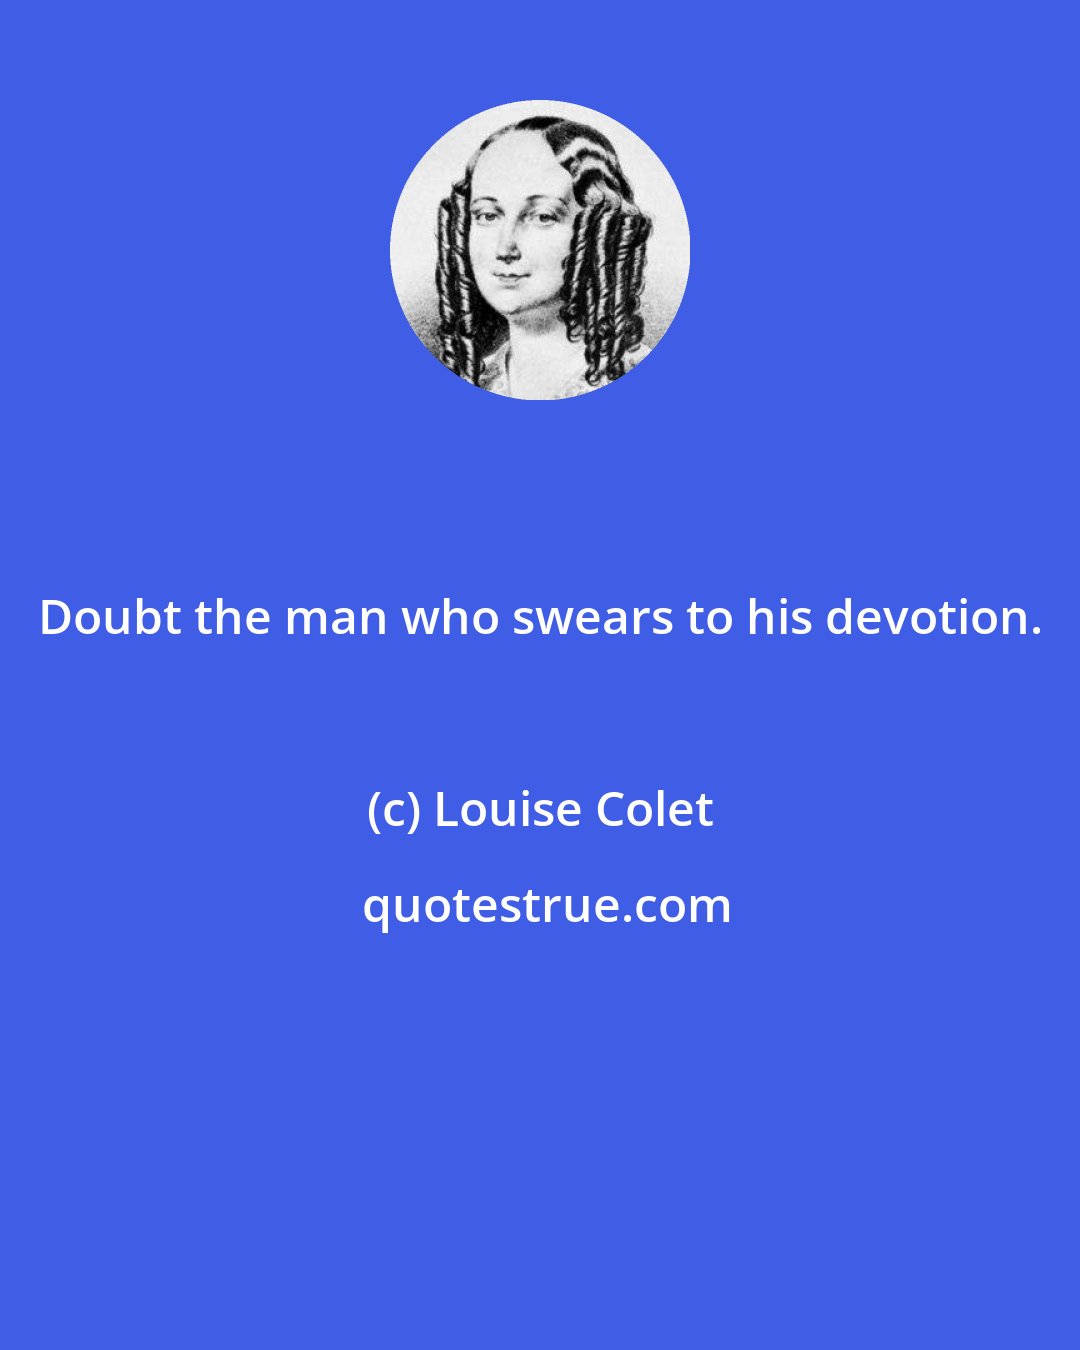 Louise Colet: Doubt the man who swears to his devotion.